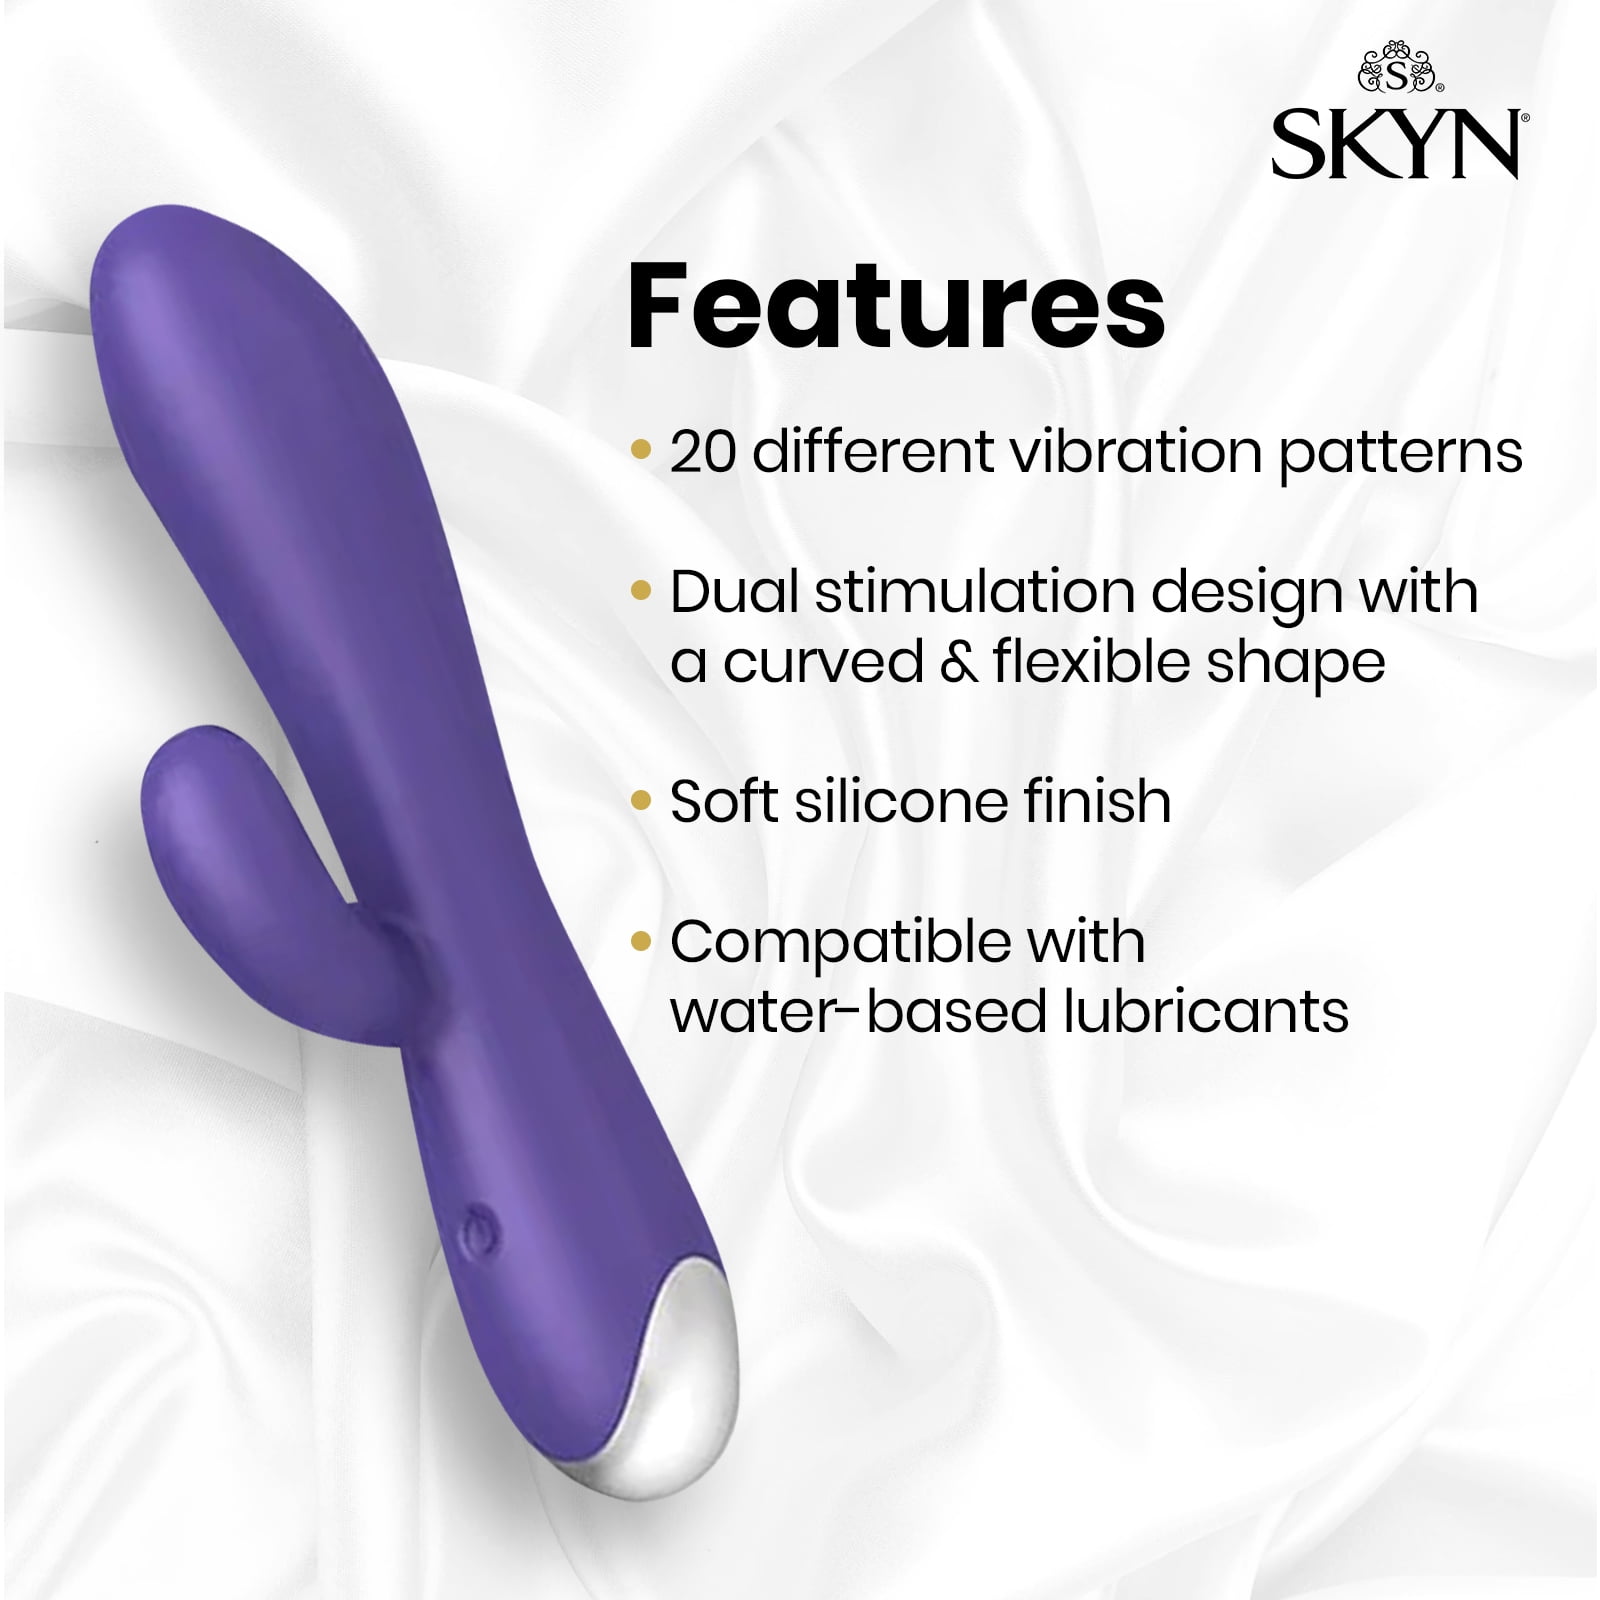 Buy SKYN® Vibes Personal Massager, Water Resistant and latex free.